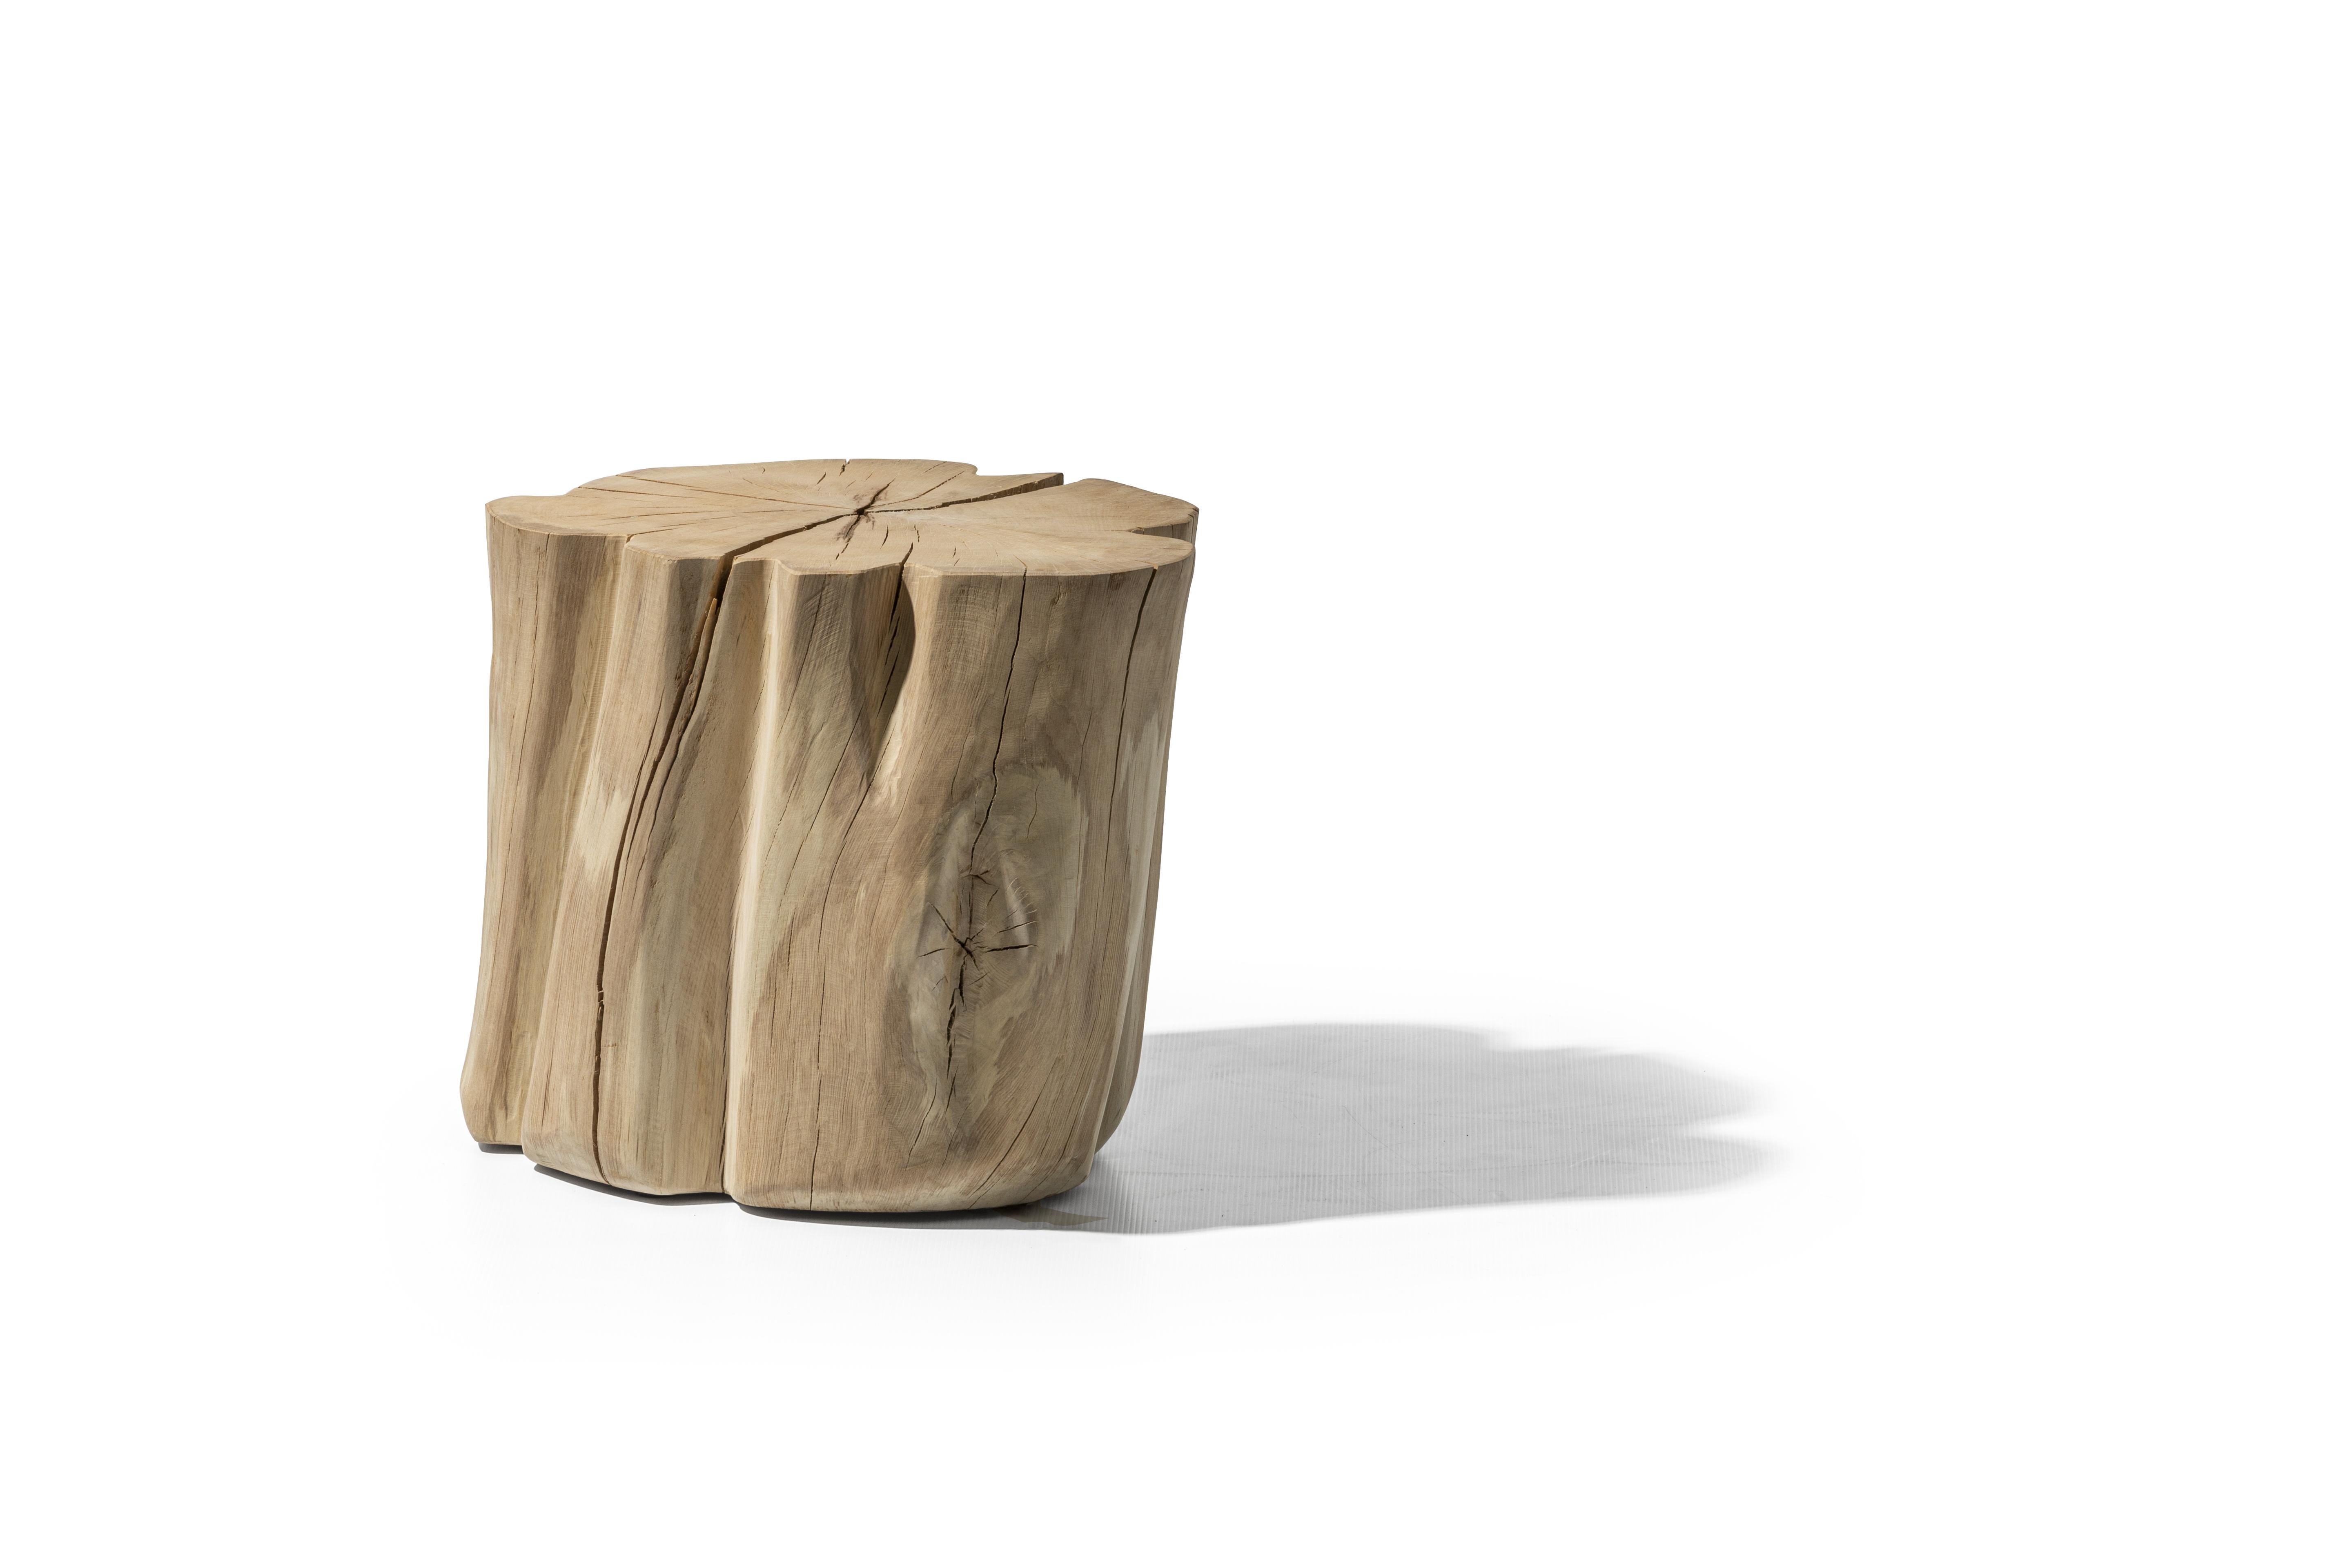 A family of poufs with Nordic suggestions, Brick XS/S/M/L are made from a section of debarked hornbeam trunk. Available in different heights and diameters, these are products with a contemporary charm, which aim to enhance the naturalness of wood.